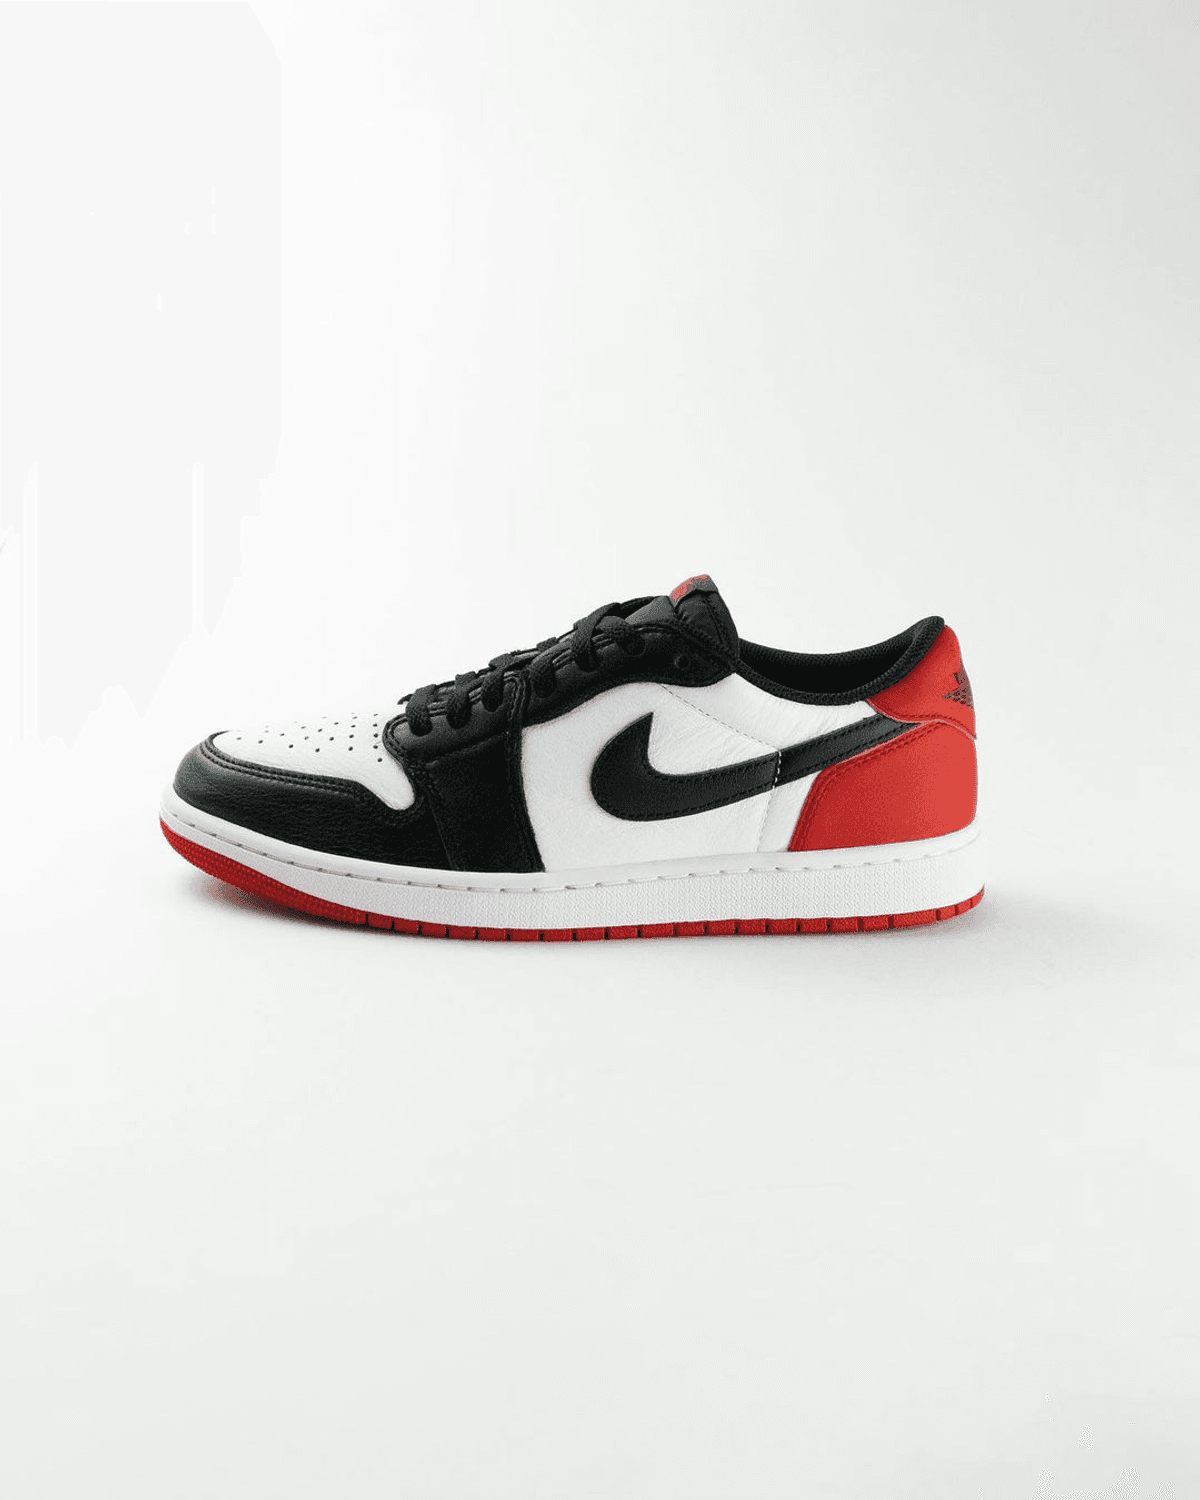 The Air Jordan 1 Low OG Black Toe Is Slated For An August Release